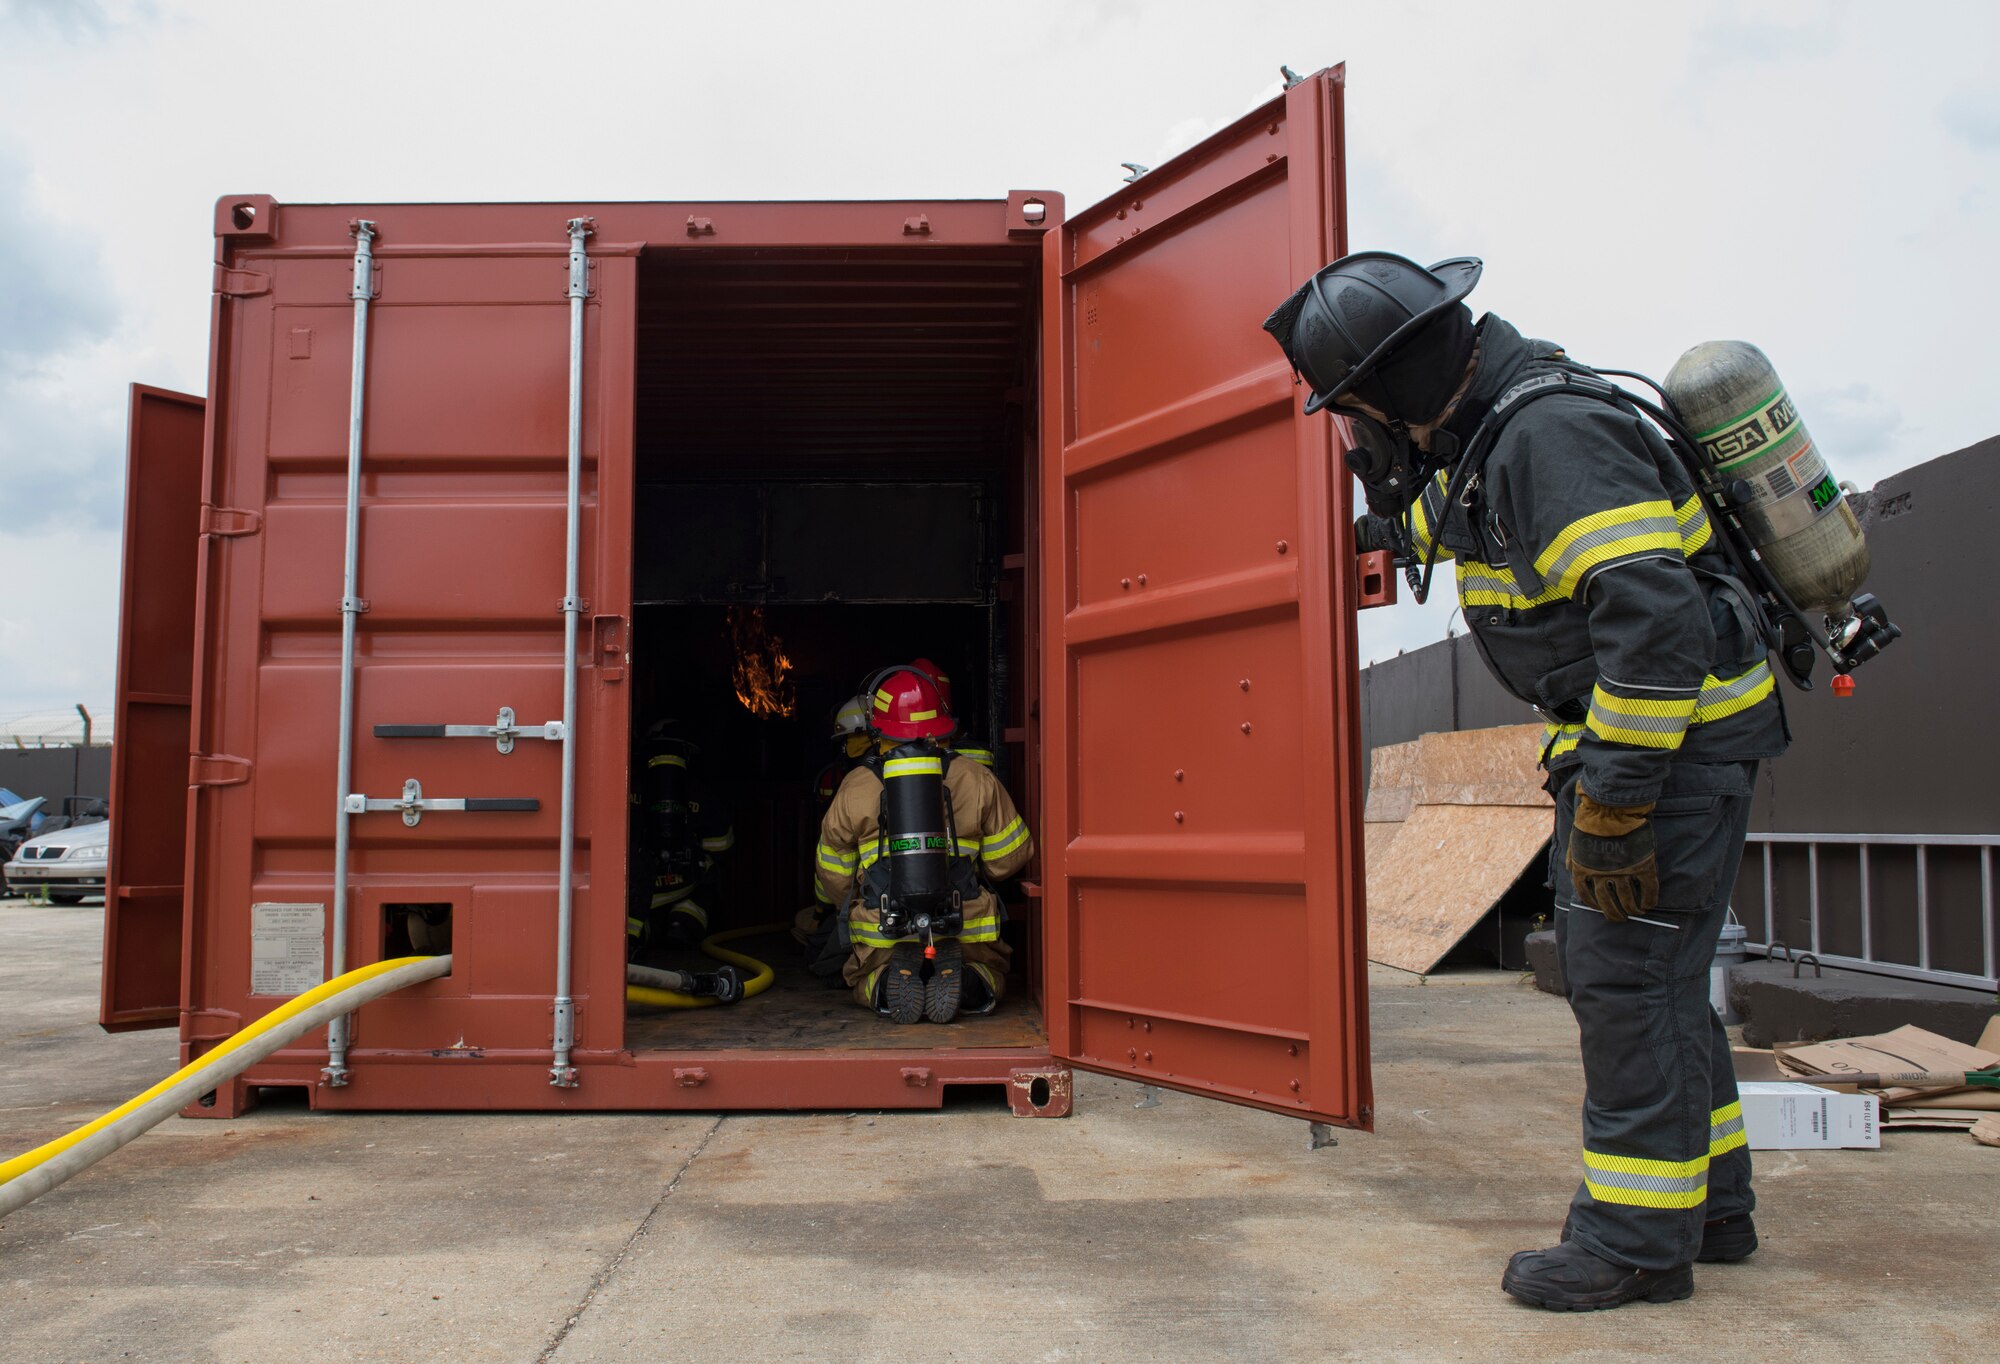 RAF Alconbury firefighters use new fire behavior trainer to practice techniques for safely fighting fires at RAF Alconbury, England, July 17, 2019. (U.S. Air Force photo by Airman 1st Class Jennifer Zima)